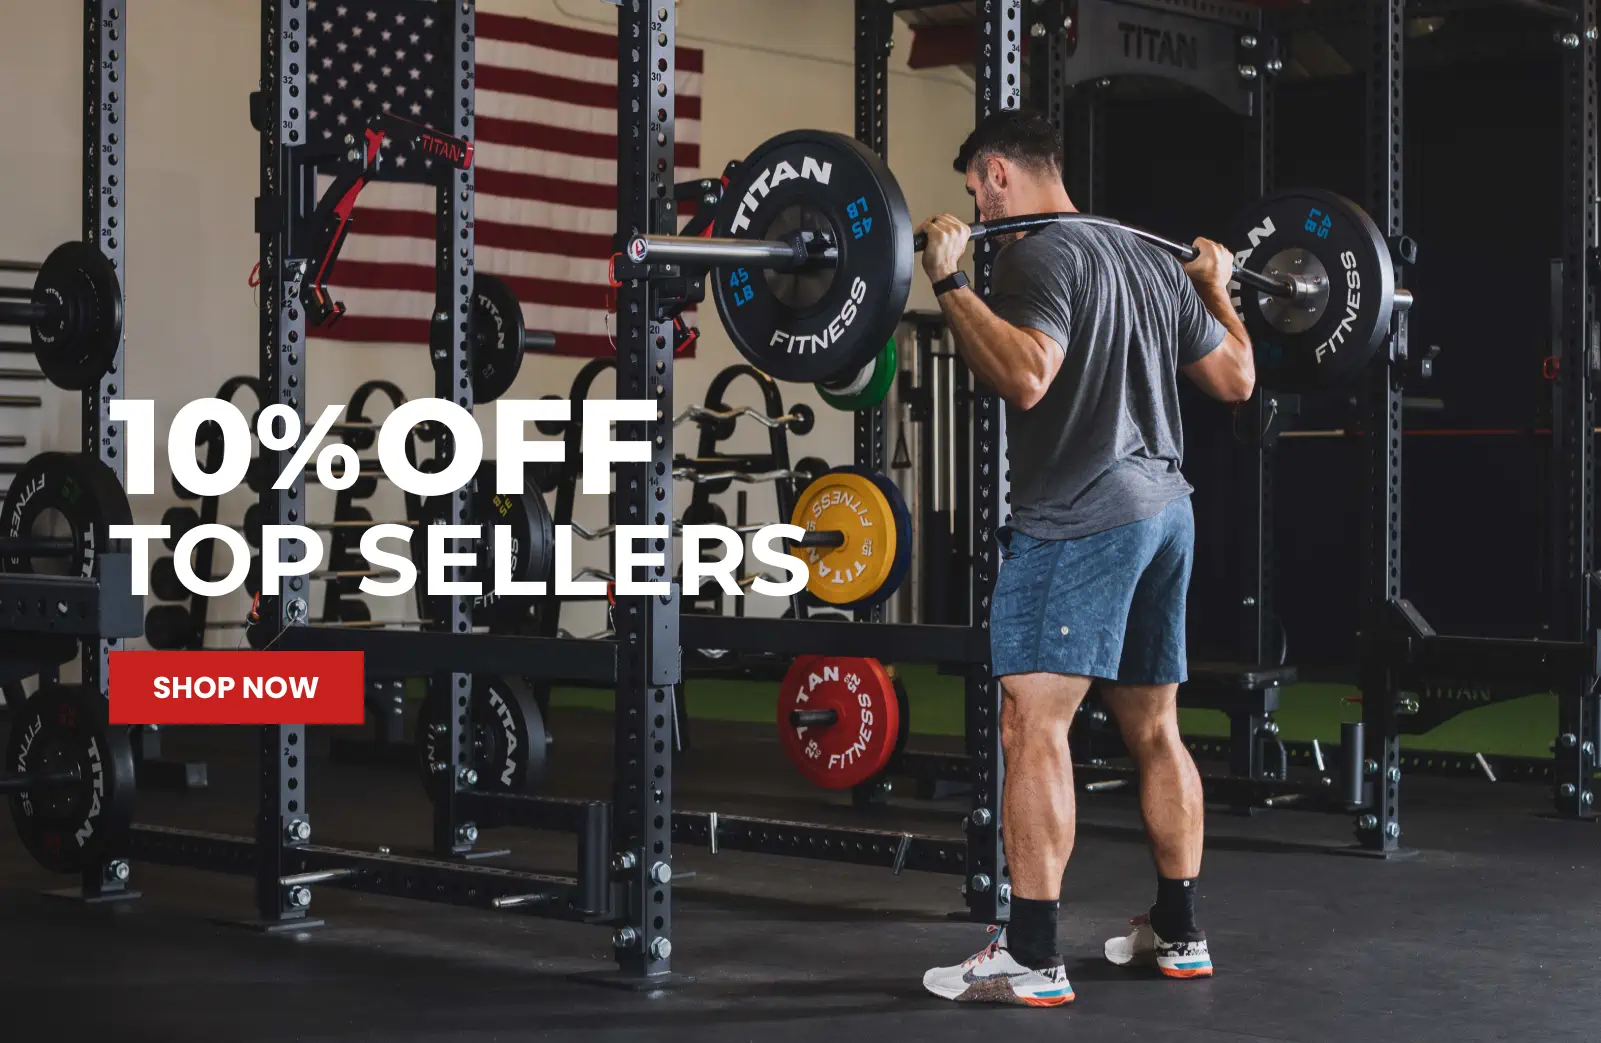 Promotion - 10% Off Top Sellers